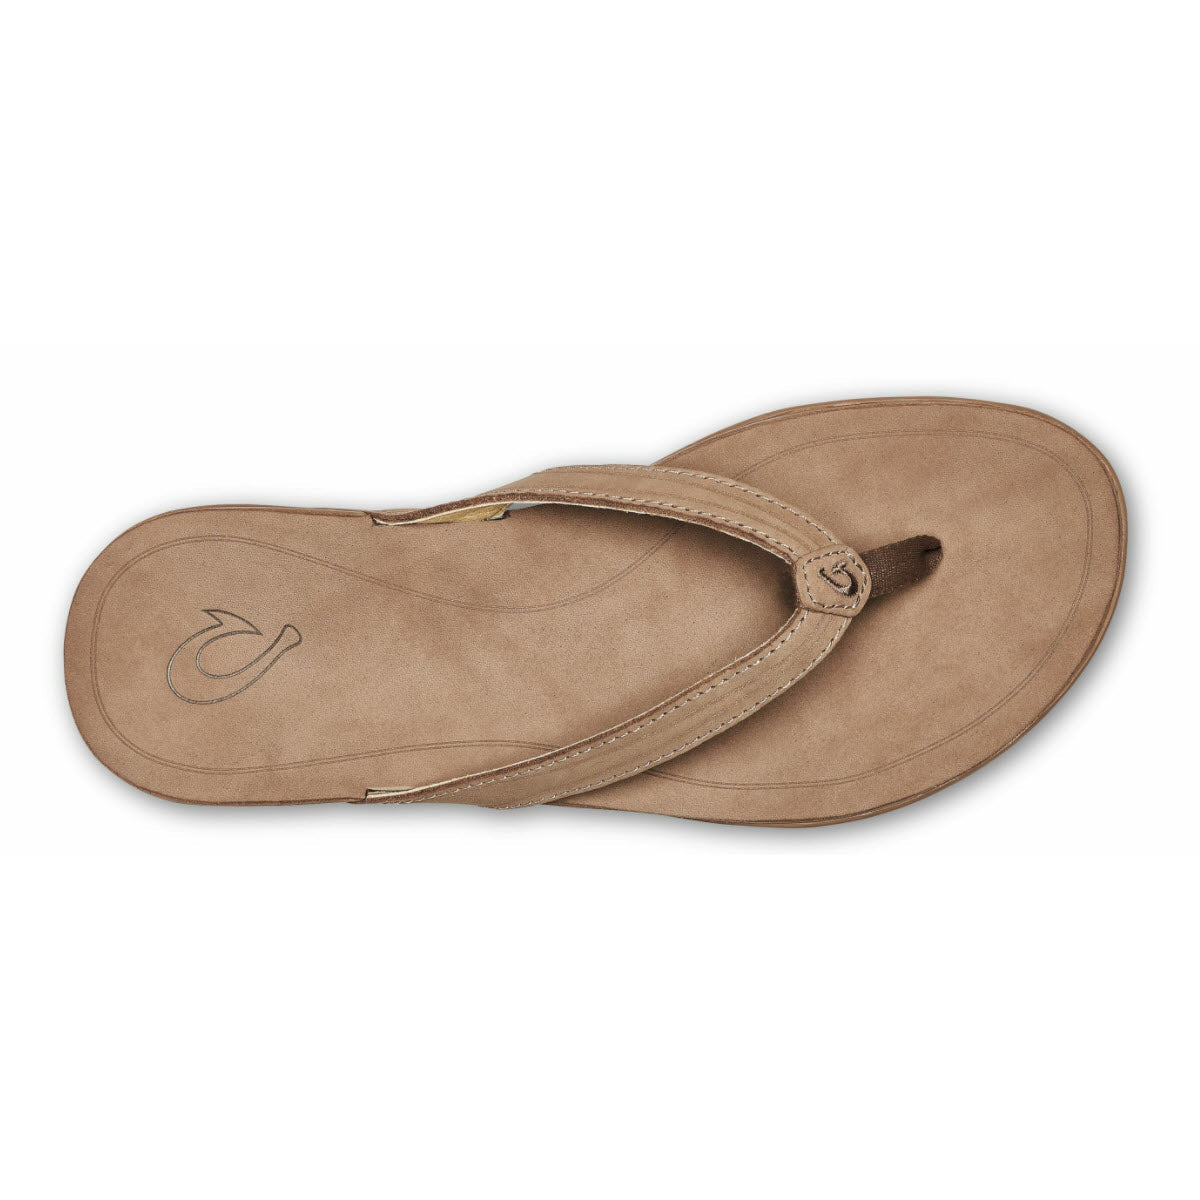 A pair of women’s Olukai Aukai Tan/Tan sandals, crafted from full-grain leather, placed side by side on a white background.